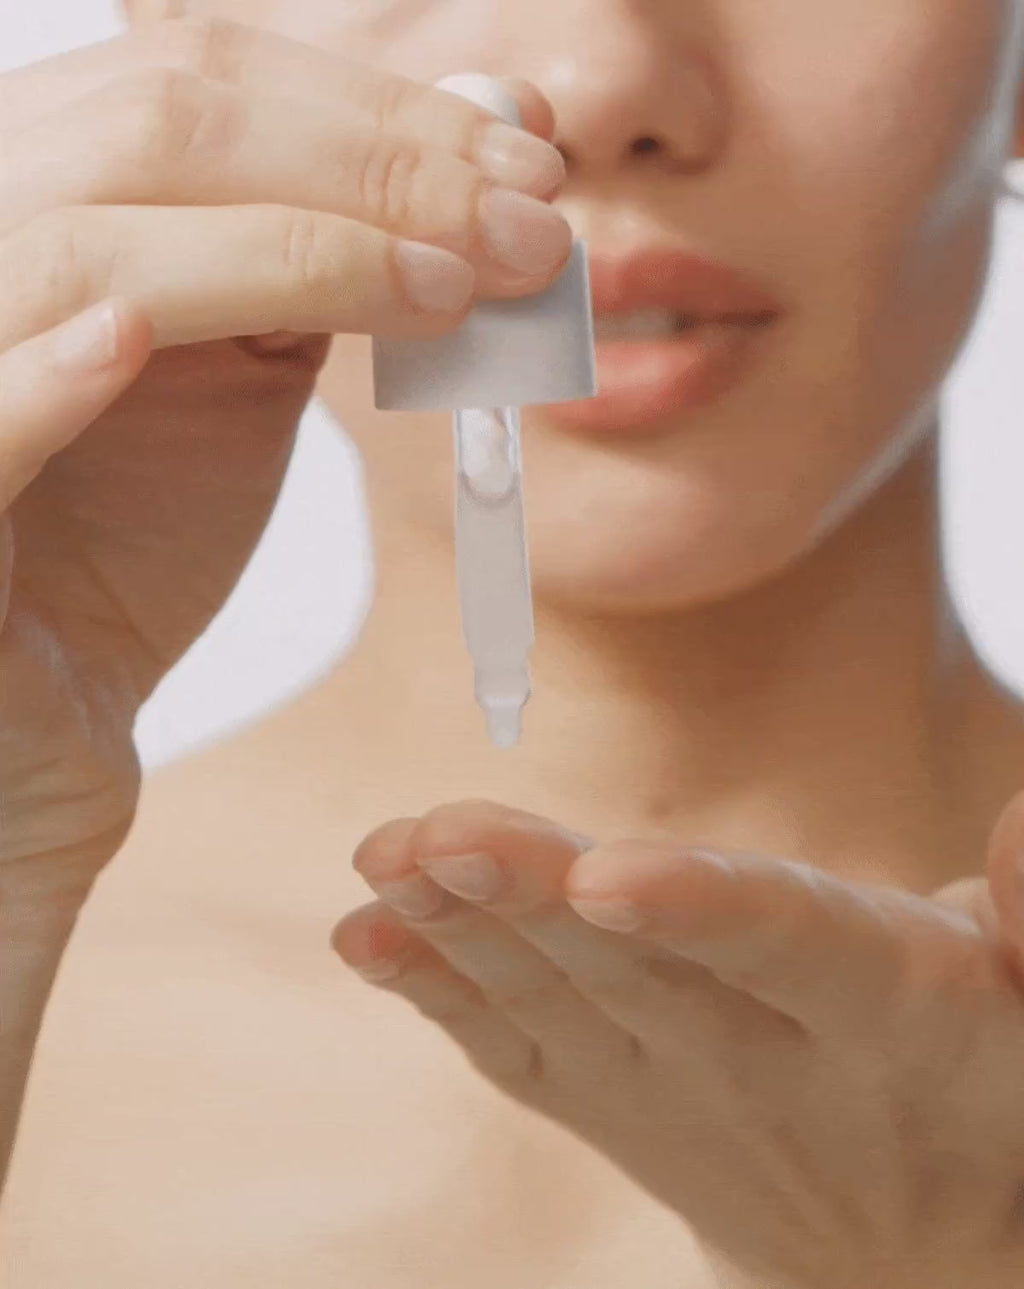 Model dispensing ACTIVE COCOONING SERUM from dropper and applying to her face 